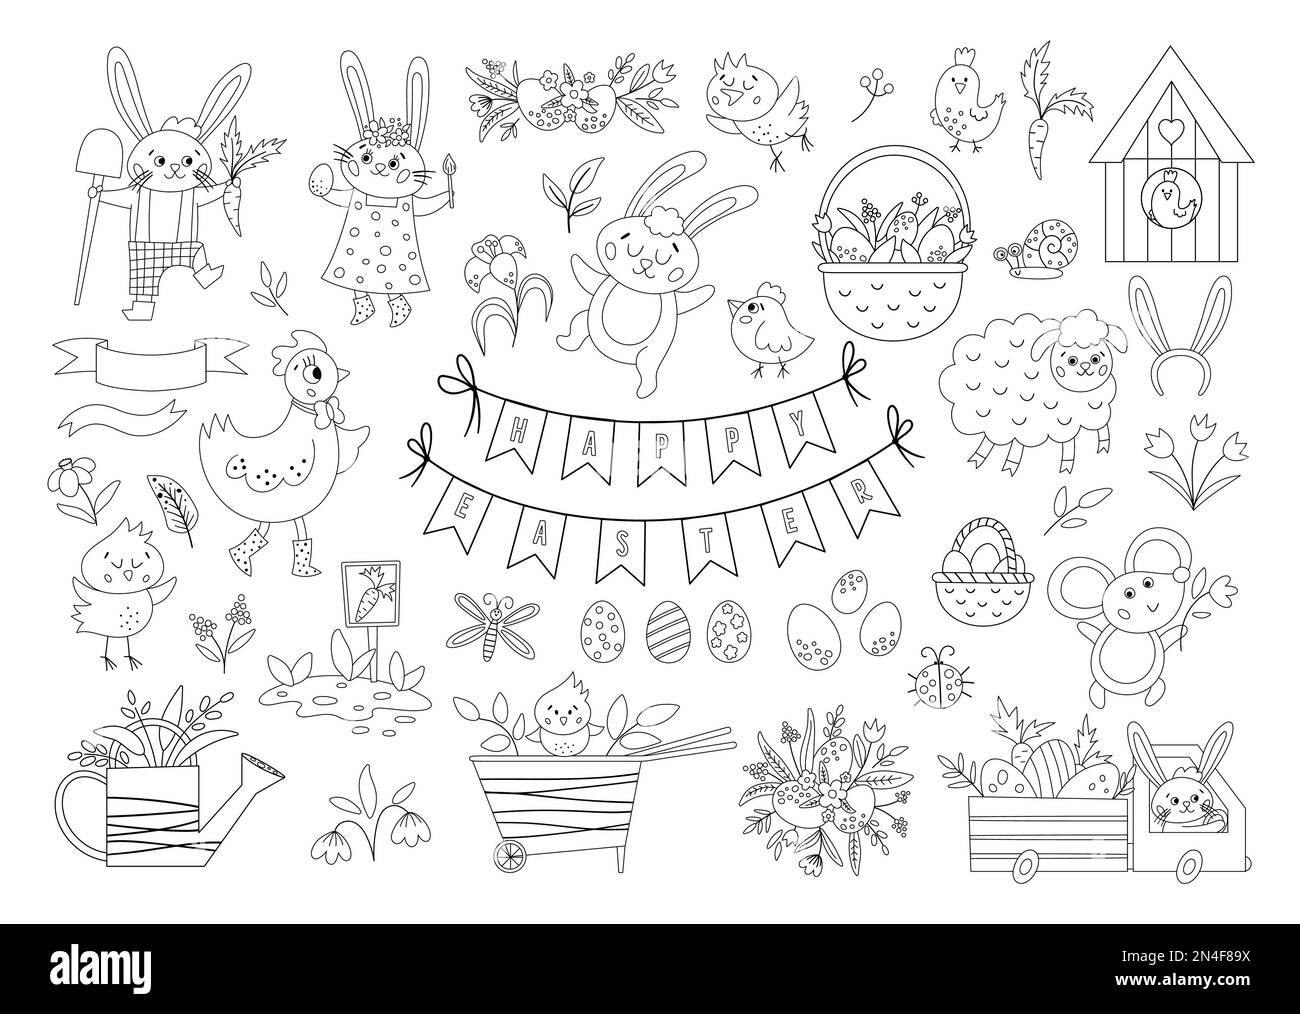 Big black and white collection of design elements for Easter. Vector outline set with cute bunny, eggs, bird, chicks, baskets. Spring funny illustrati Stock Vector